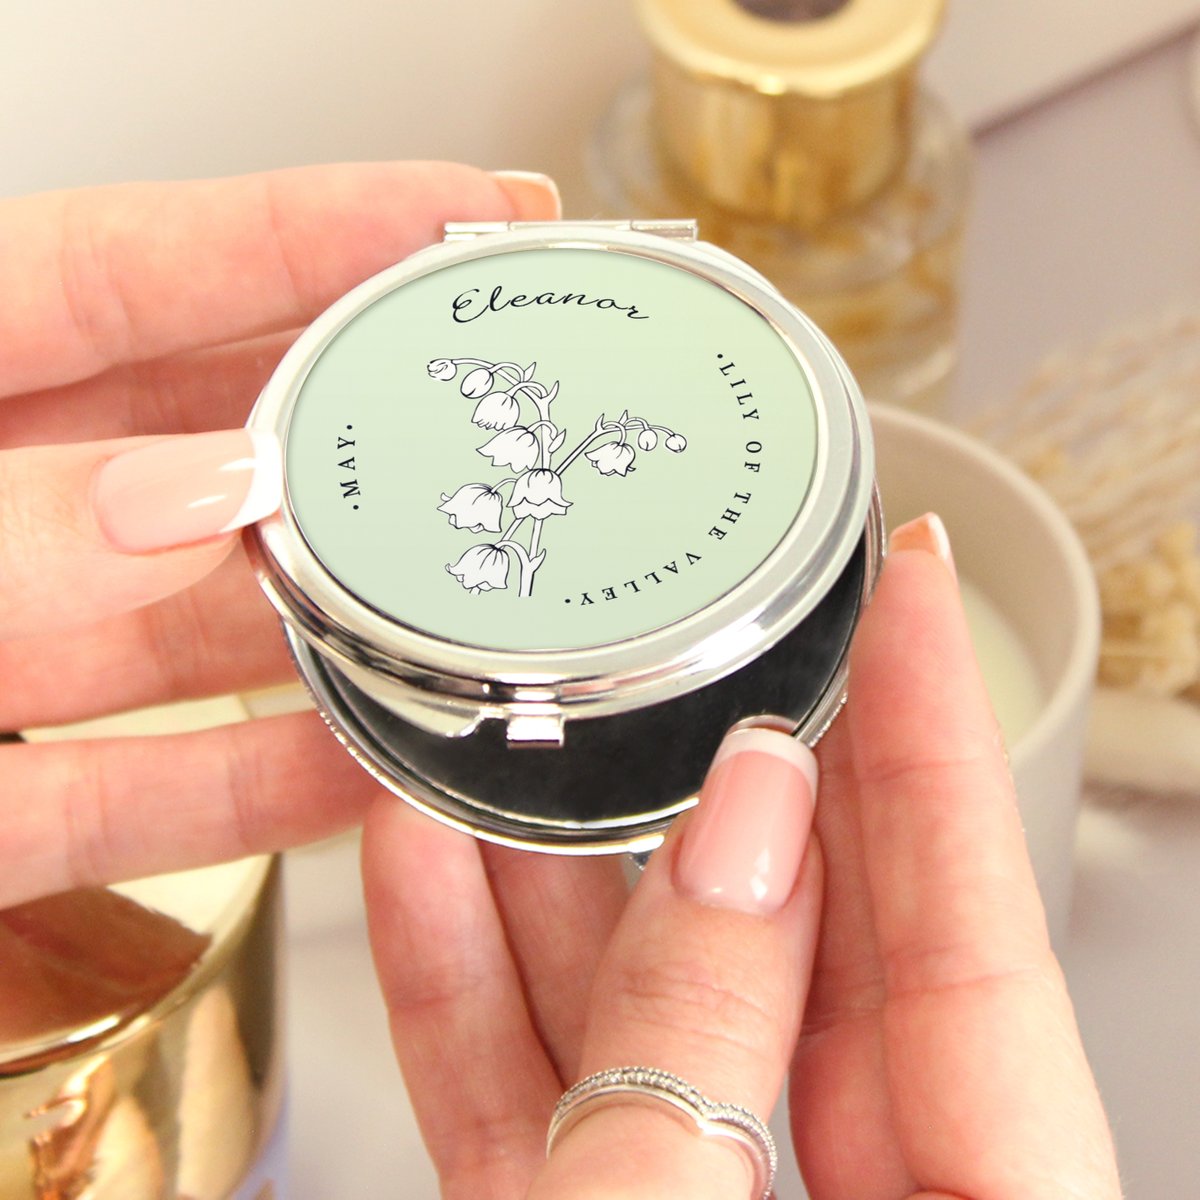 Personalised with any name, this compact mirror featuring the birth flower for May, is a pretty gift idea for a birthday this month lilybluestore.com/products/perso…

#giftideas #birthday #mhhsbd #earlybiz